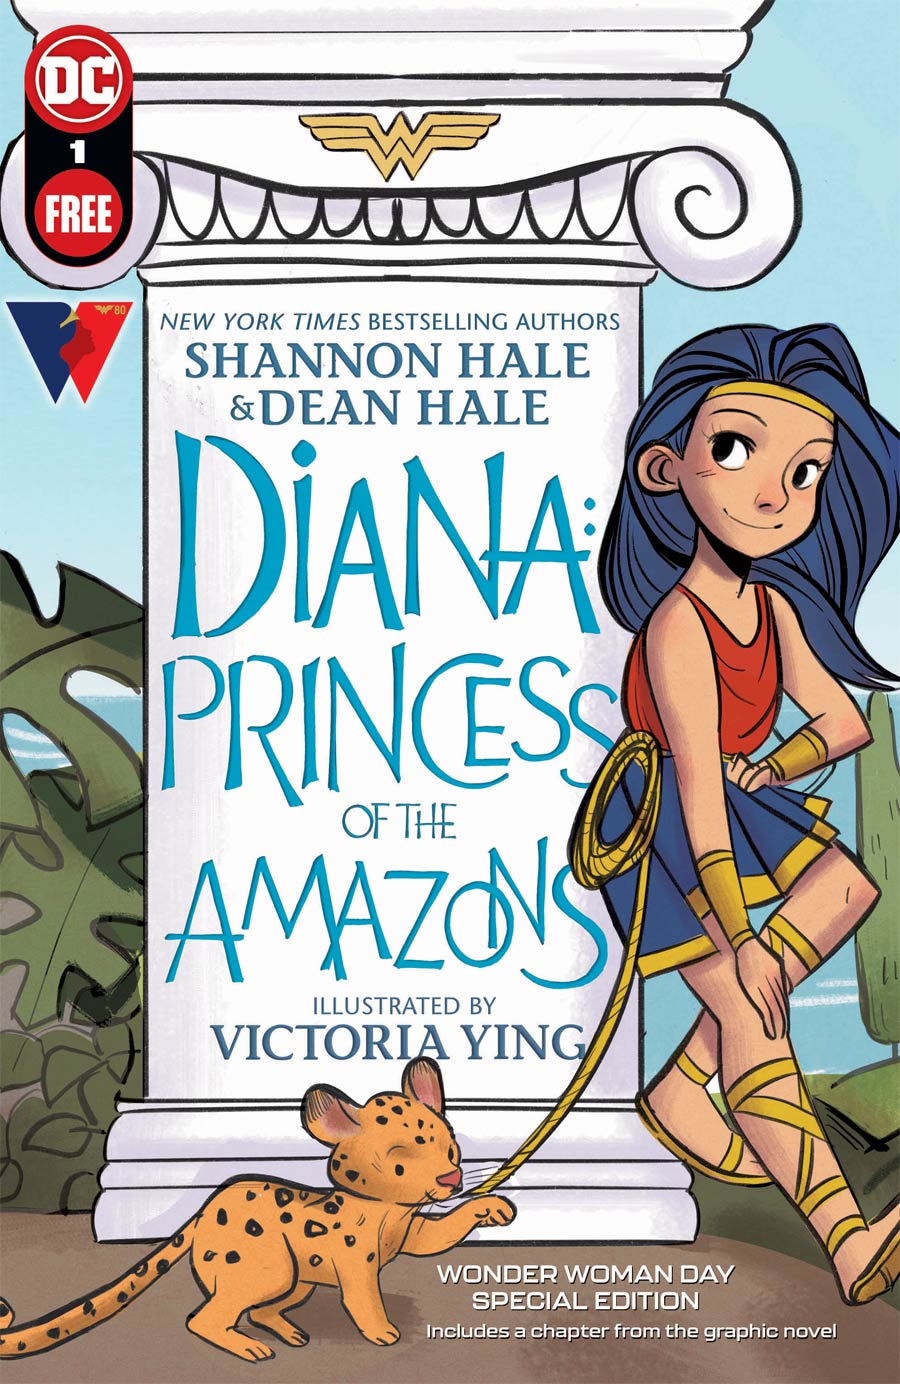 Diana Princess Of The Amazons Wonder Woman Day Special Edition #1 (One Shot) - FREE - Limit 1 Per Customer